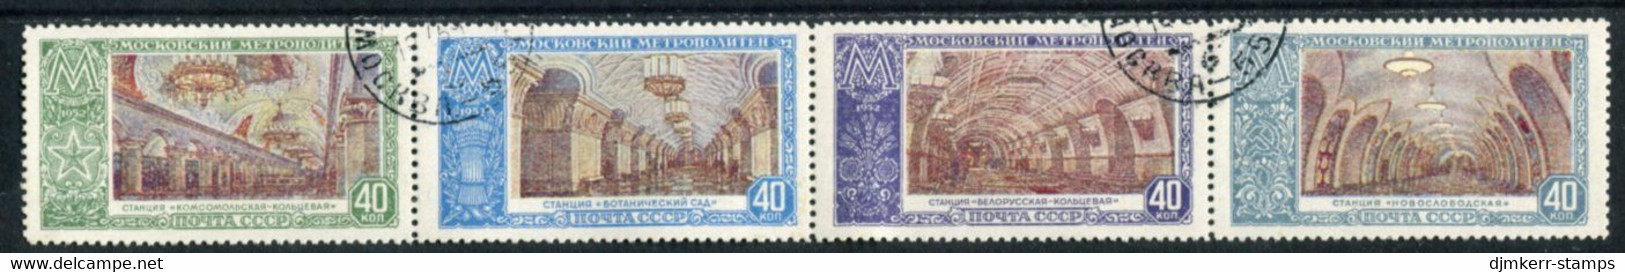 SOVIET UNION 1952 Extension Of Moscow Metro Strip Used.  Michel 1659-62 Vs II - Used Stamps